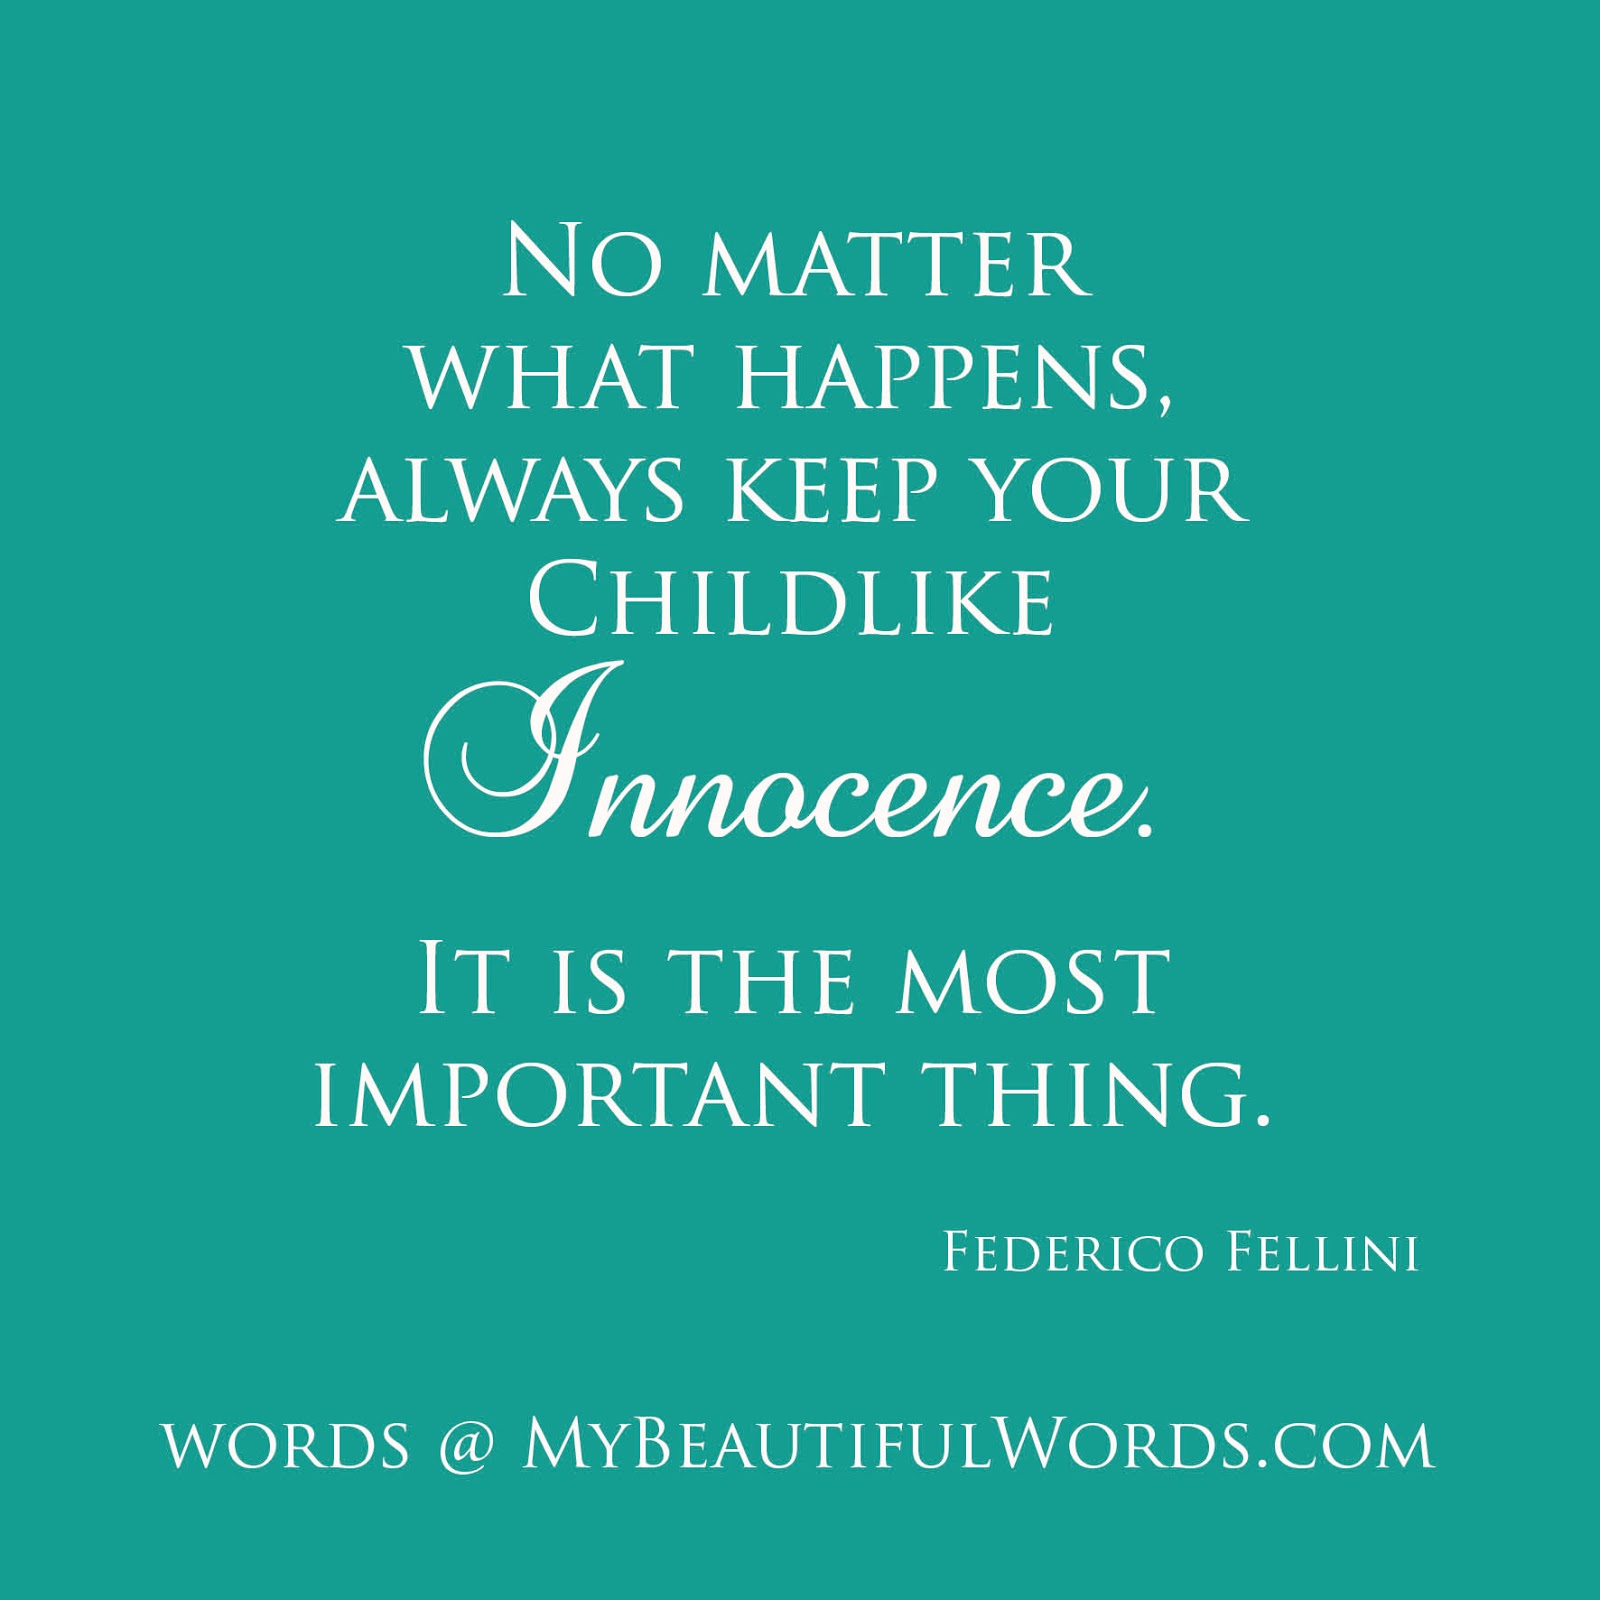 No matter what happens, always Keep your childhood innocence. It's the most important thing. Federico Fellini